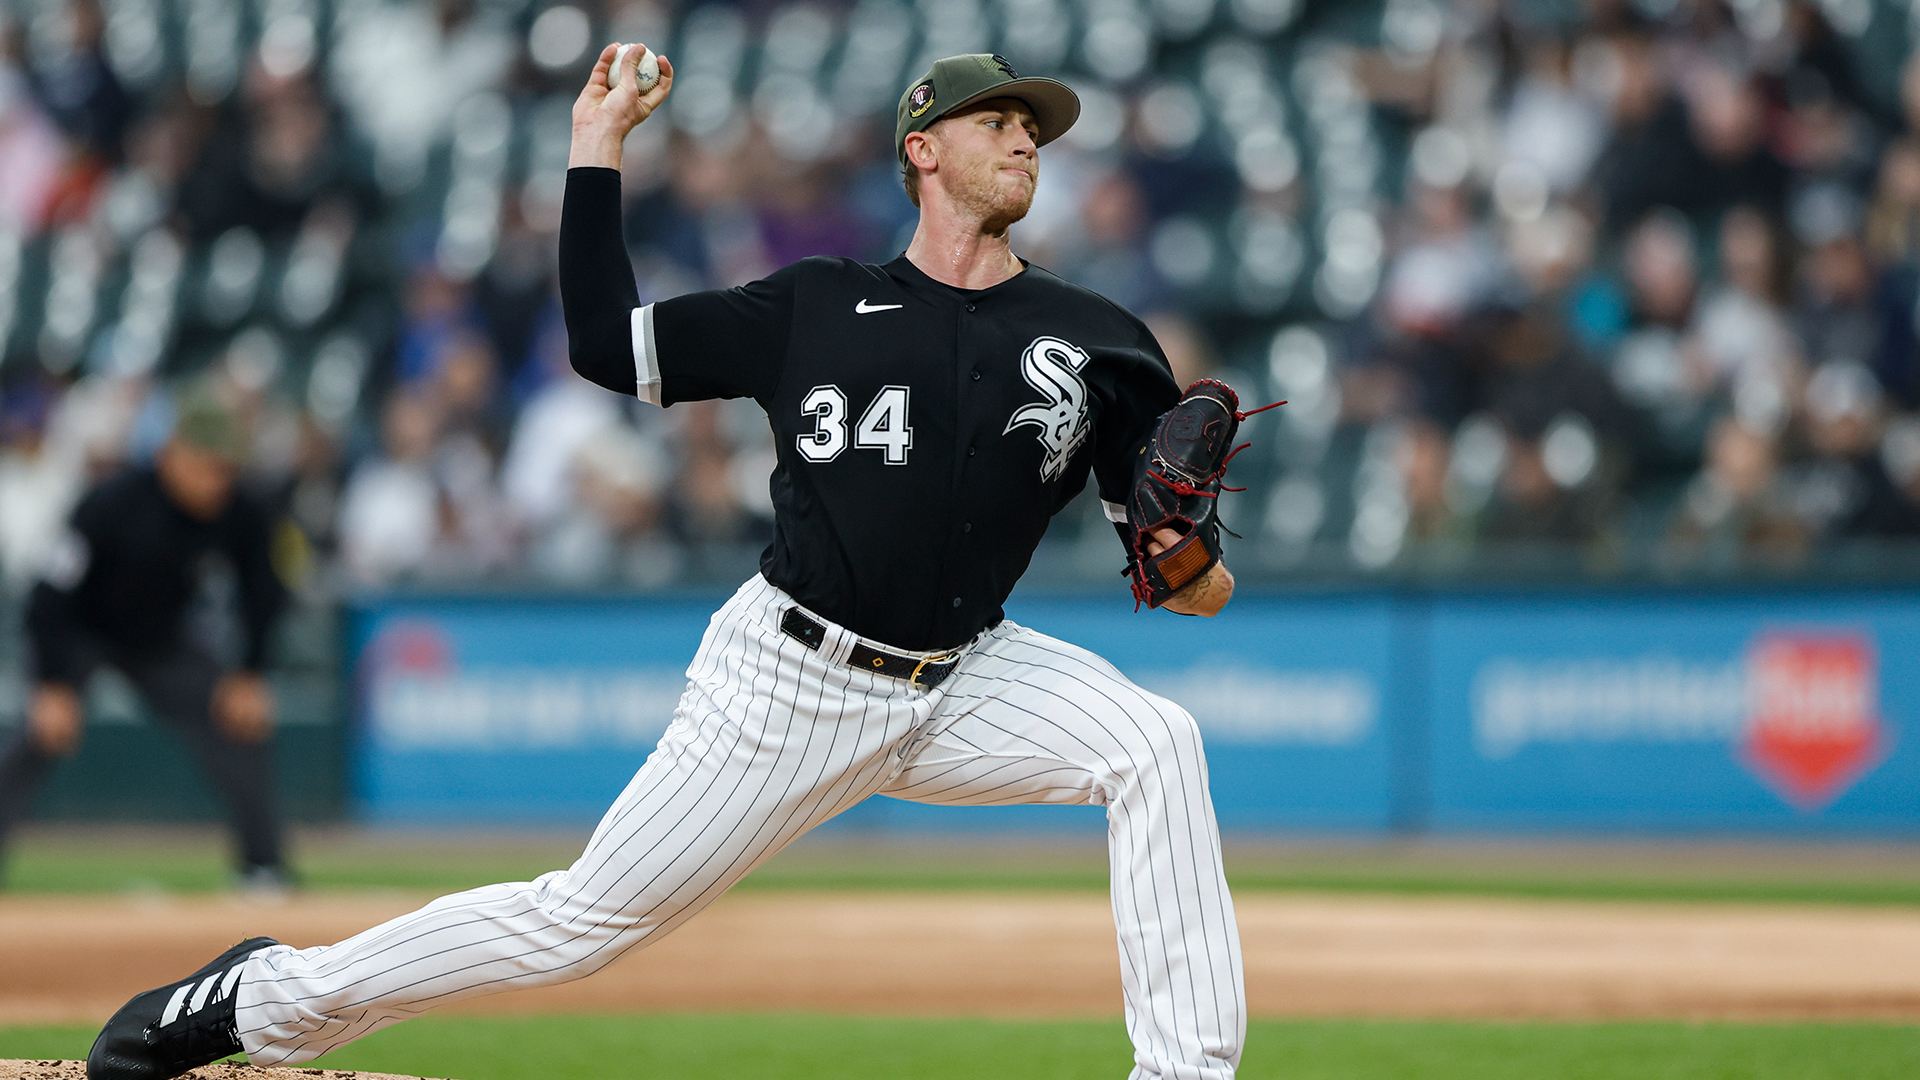 White Sox hit with Michael Kopech injury early in game vs. Royals